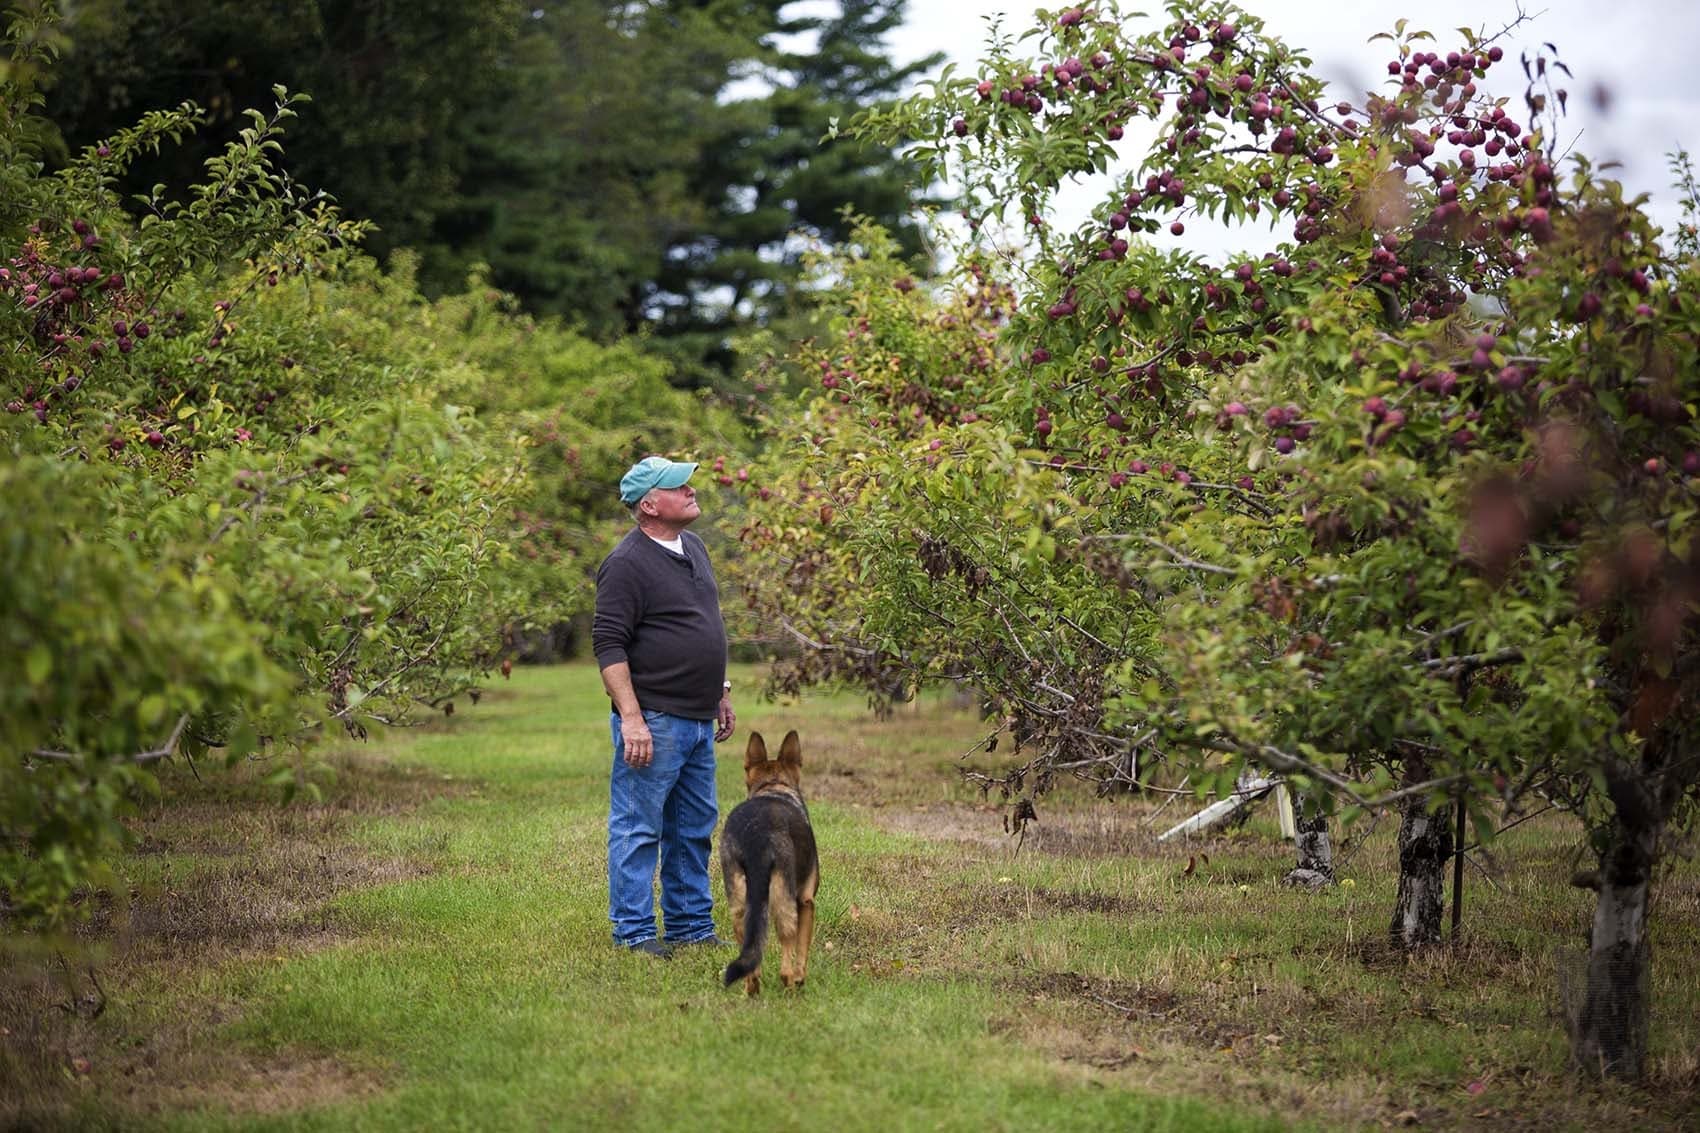 With his dog Nala, Dartmouth Orchards owner Brian Medeiros examines the apple trees affected by this summer's drought. (Jesse Costa/WBUR)